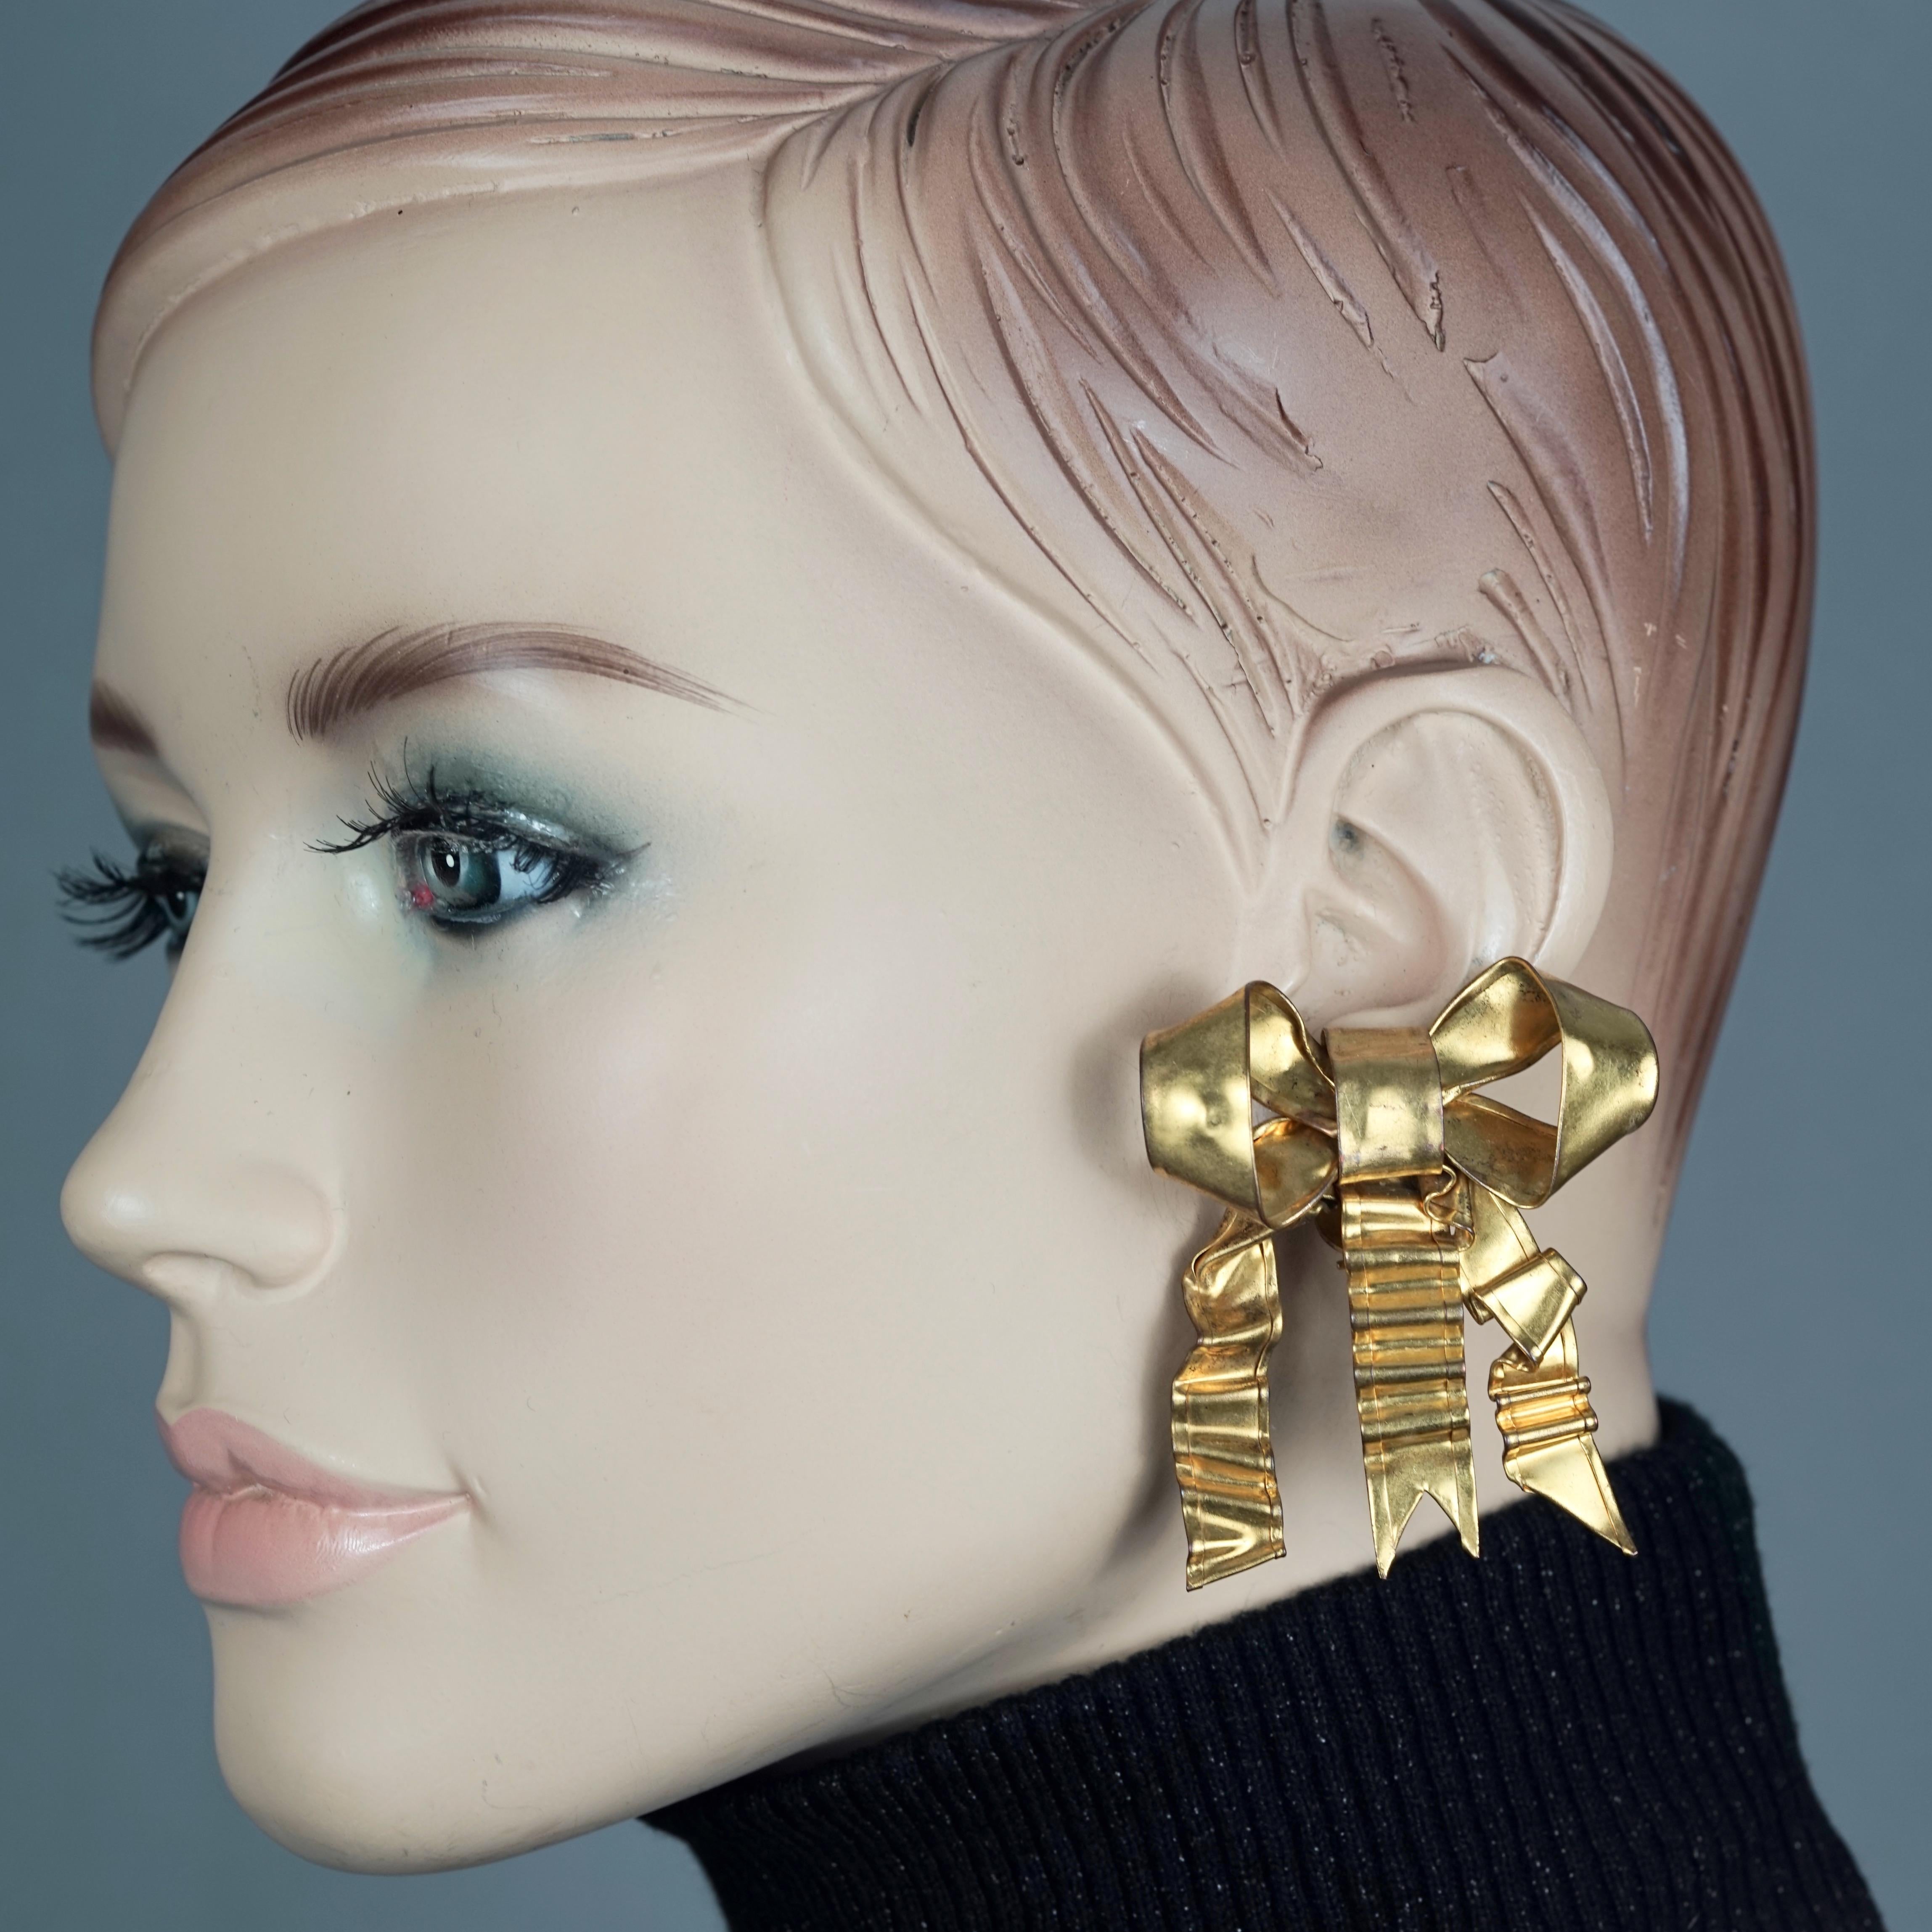 Vintage Massive PATRICK RETIF French Ribbon Earrings

Measurements: 
Height: 2.16 inches (5.5 cm)
Width: 1.97 inches (5 cm)
Weight per Earring: 10 grams

Features:
- 100% Authentic PATRICK RETIF.
- Massive French ribbon/ bow earrings.
- Gold and